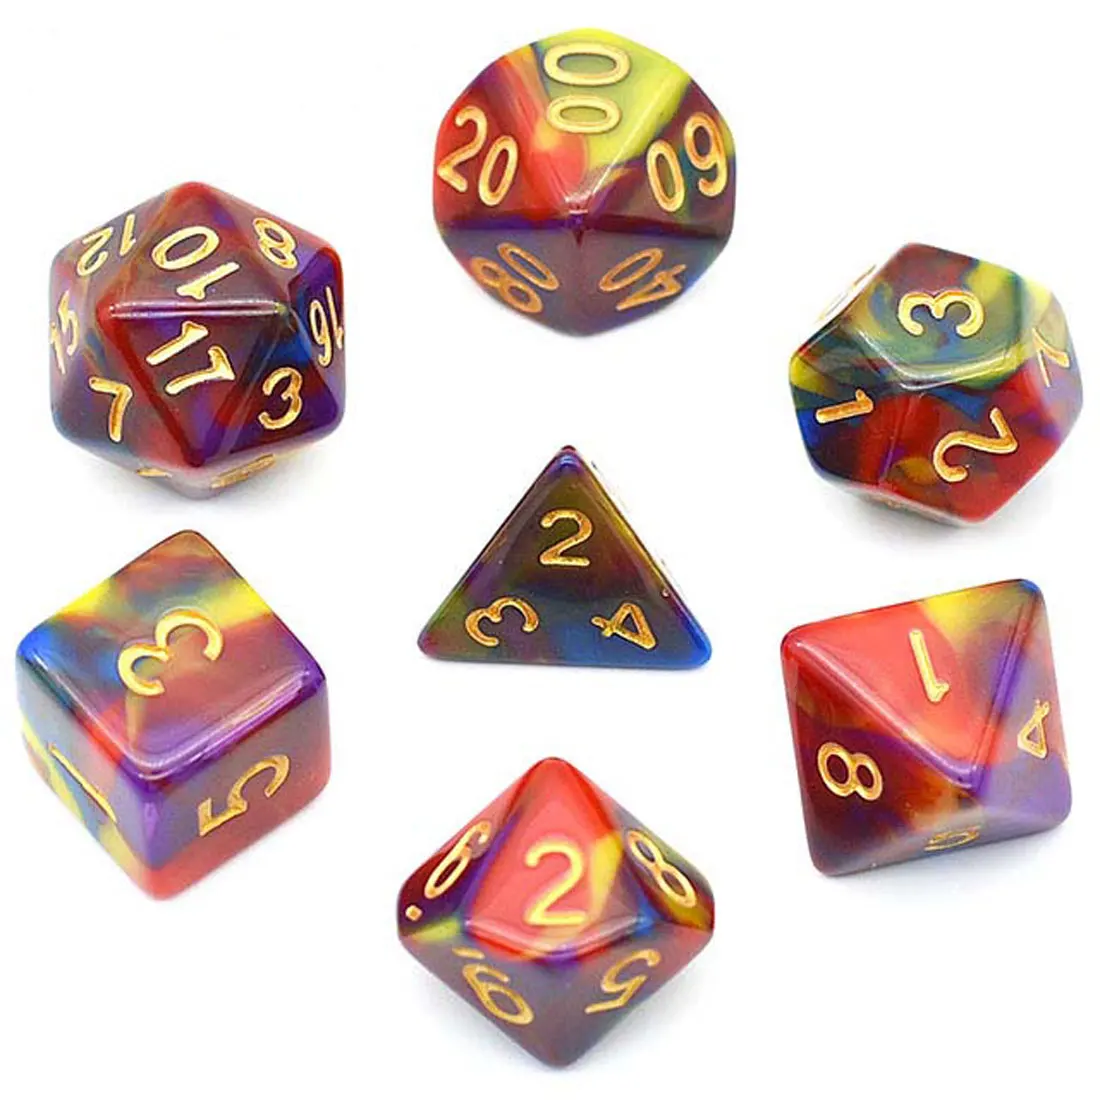 

DND Dice Set D4 D6 D8 D10 D% D12 D20 Four Color Mixing Polyhedral Dice for Dungeons and Dragon Role Playing Board Game D&D MTG